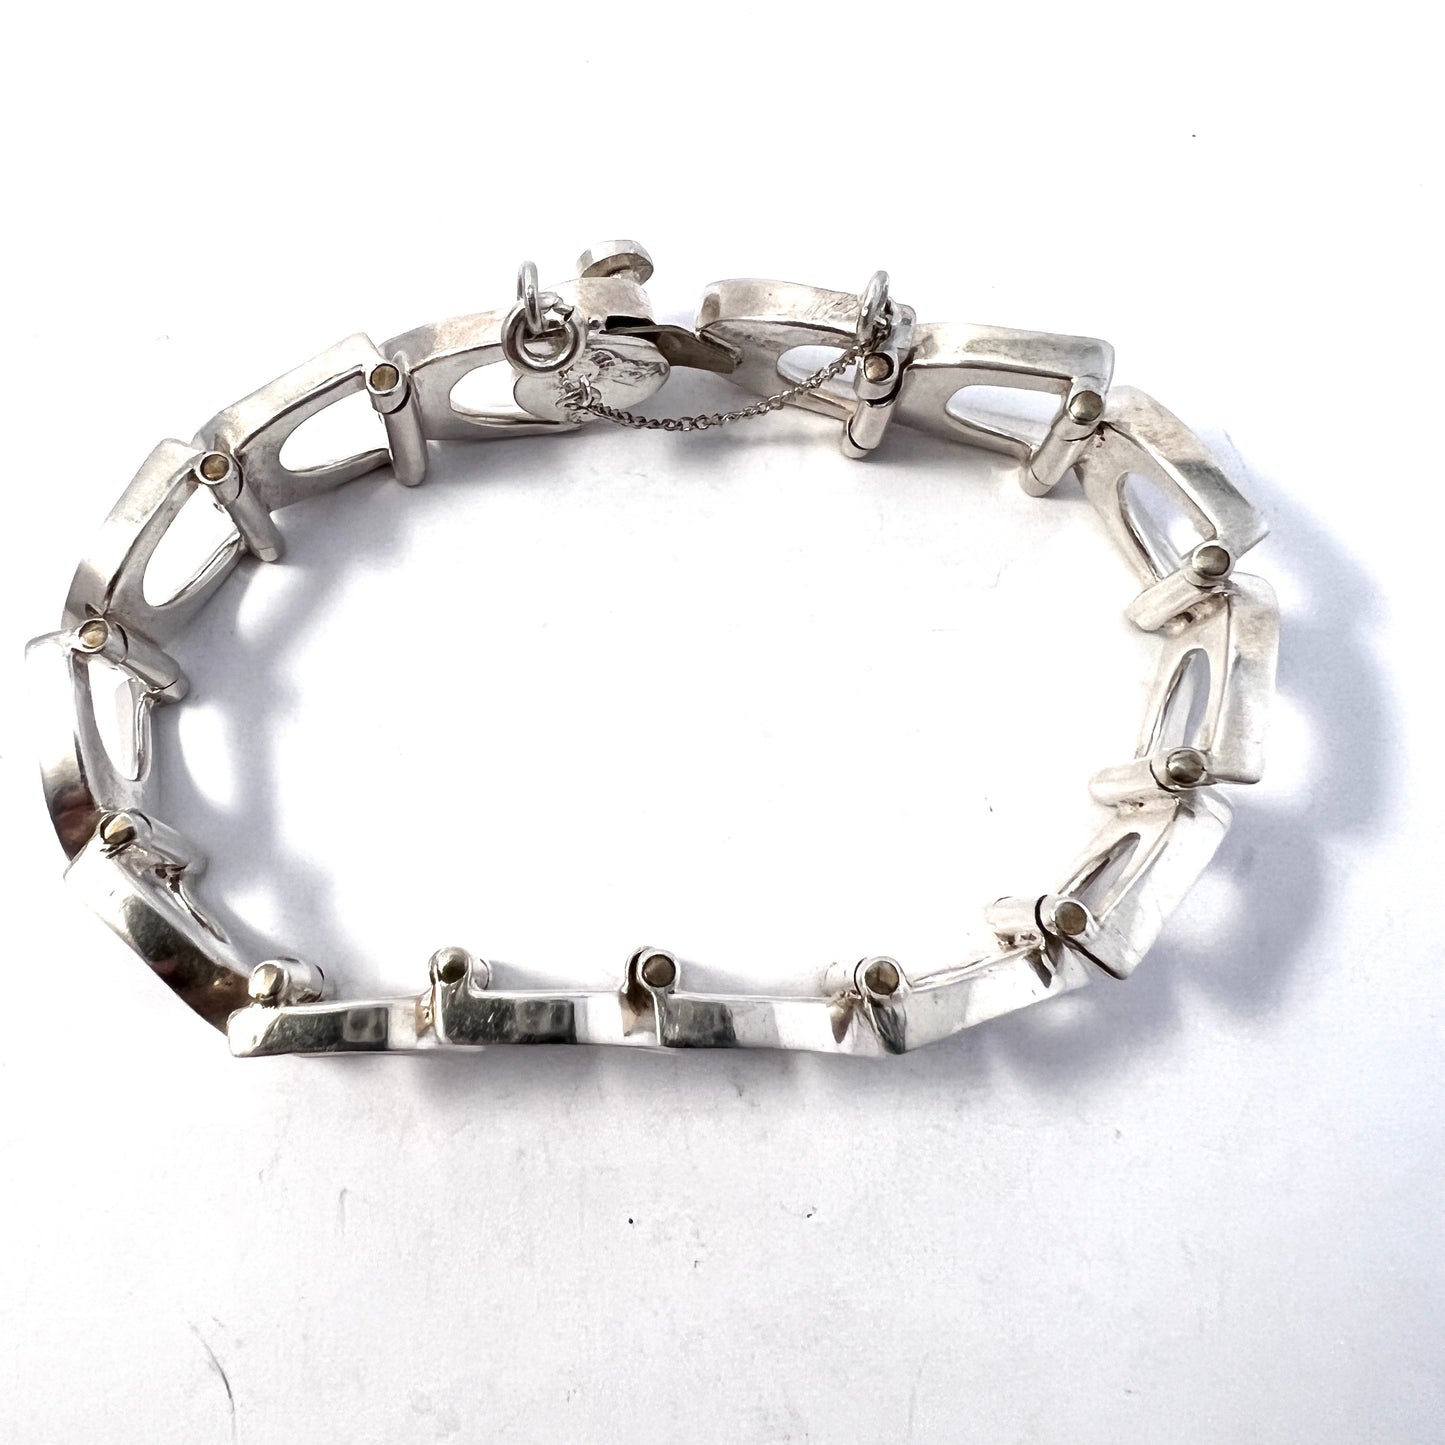 Taxco, Mexico 1950s. Chunky Mid Century Sterling Silver Bracelet. Makers Mark.